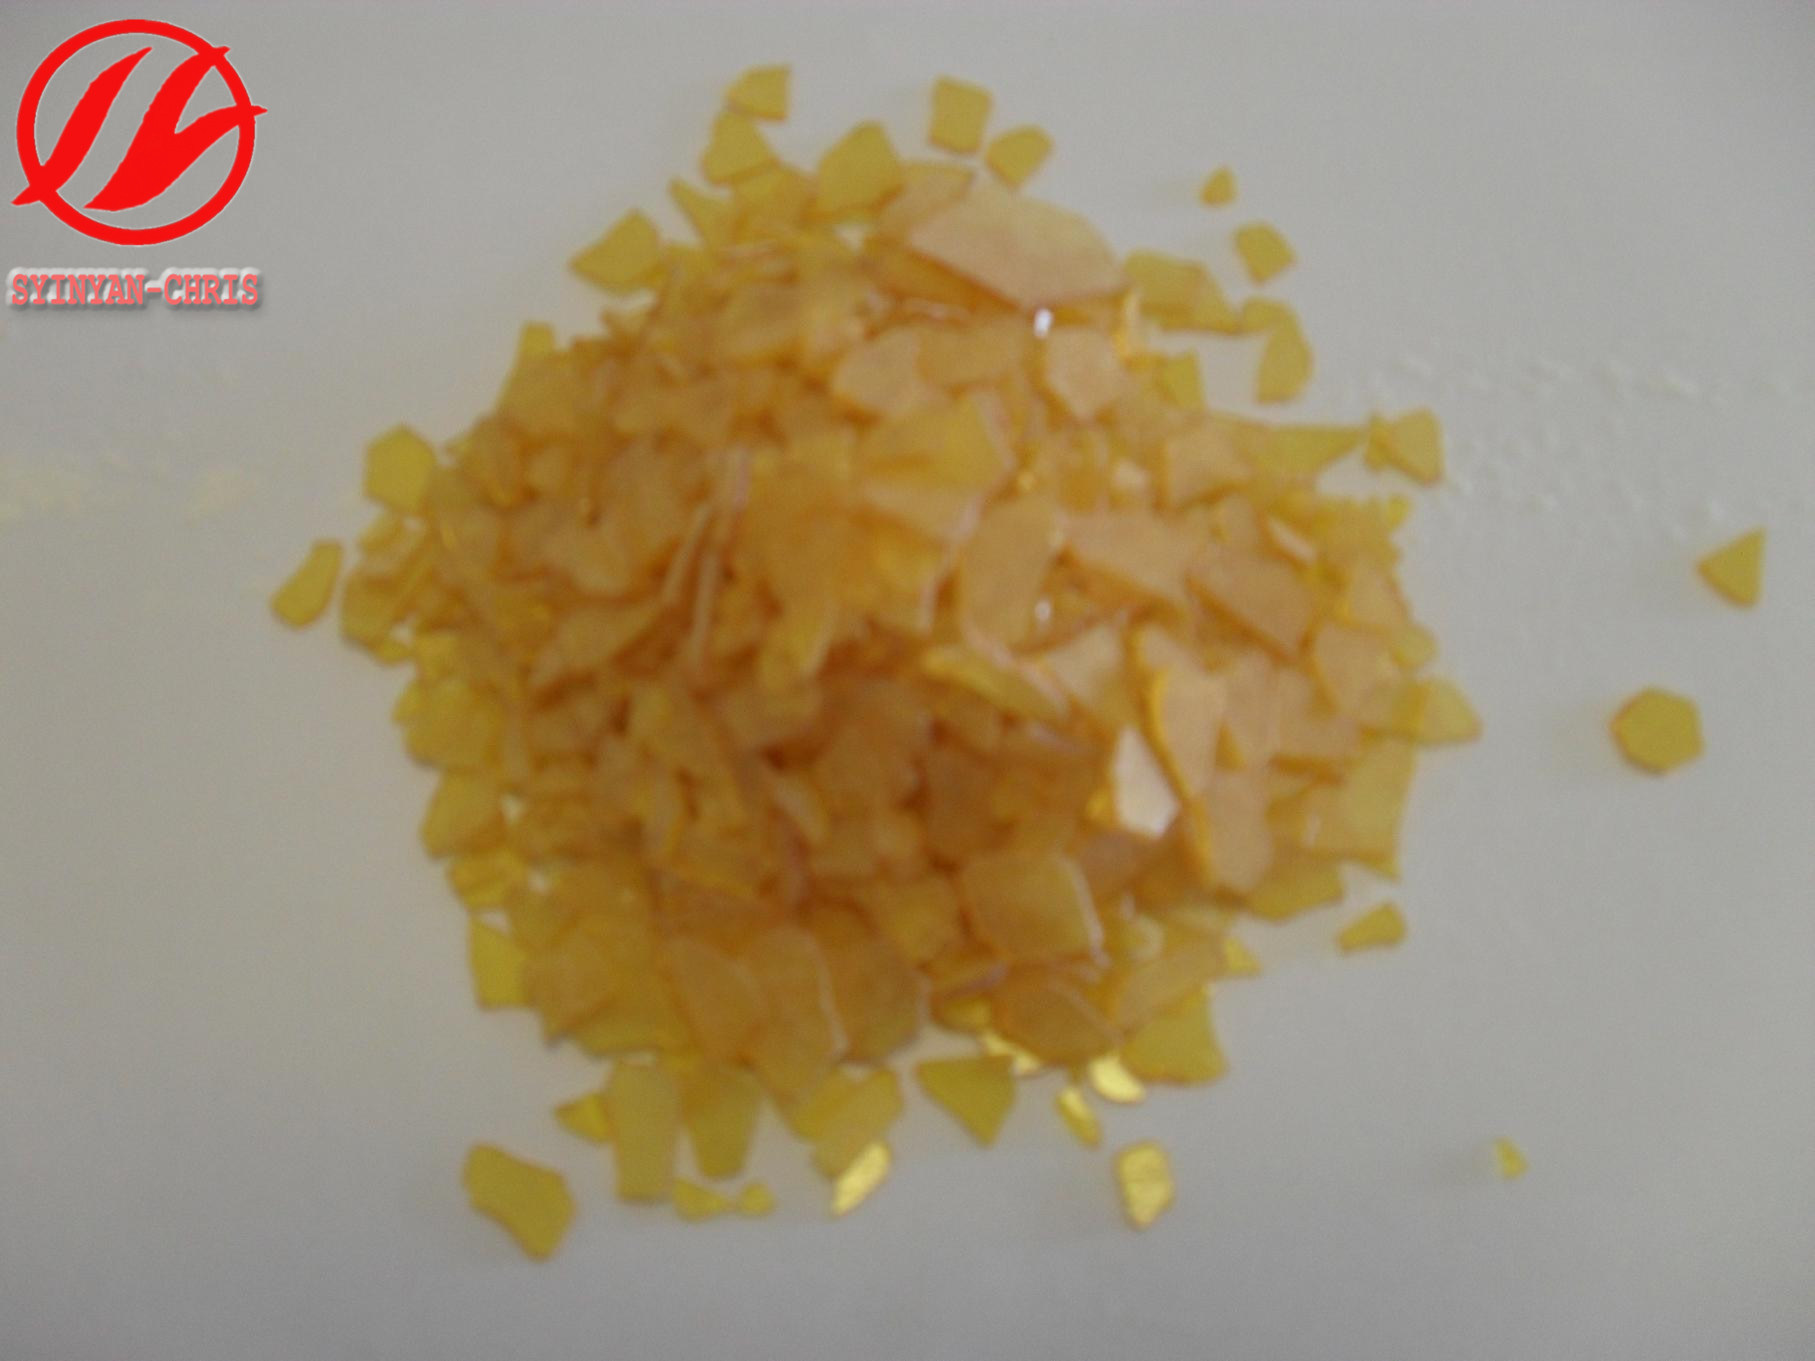 Refined C9 Petroleum Resin for Coating and Adhesives